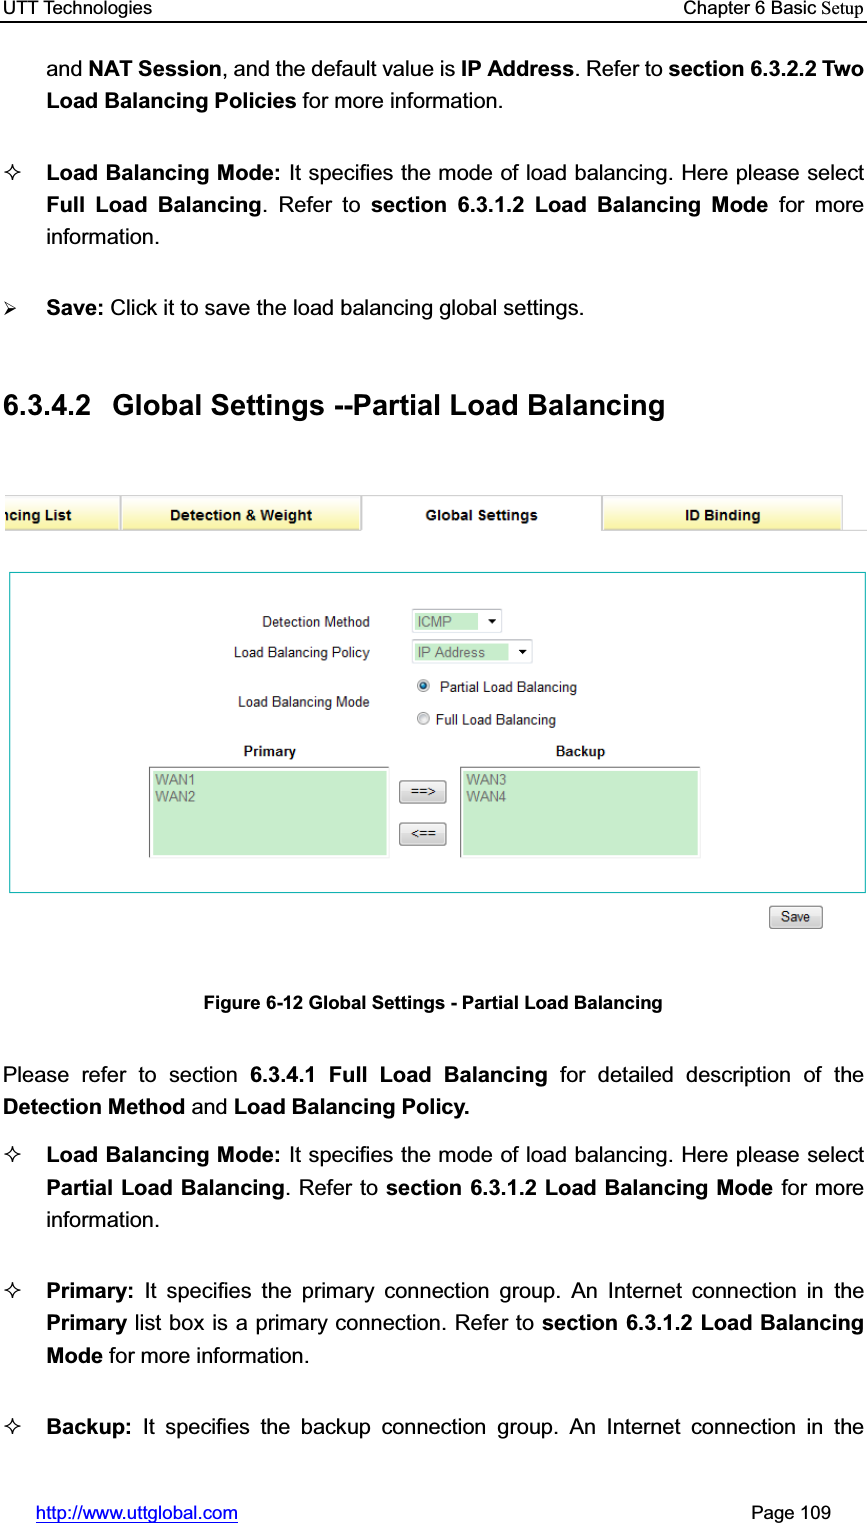 UTT Technologies    Chapter 6 Basic Setuphttp://www.uttglobal.com                                                       Page 109 and NAT Session, and the default value is IP Address. Refer to section 6.3.2.2 Two Load Balancing Policies for more information.Load Balancing Mode: It specifies the mode of load balancing. Here please select Full Load Balancing. Refer to section 6.3.1.2 Load Balancing Mode for more information. ¾Save: Click it to save the load balancing global settings.6.3.4.2  Global Settings --Partial Load Balancing Figure 6-12 Global Settings - Partial Load Balancing Please refer to section 6.3.4.1 Full Load Balancing for detailed description of theDetection Method and Load Balancing Policy. Load Balancing Mode: It specifies the mode of load balancing. Here please select Partial Load Balancing. Refer to section 6.3.1.2 Load Balancing Mode for more information. Primary: It specifies the primary connection group. An Internet connection in the Primary list box is a primary connection. Refer to section 6.3.1.2 Load Balancing Mode for more information. Backup:  It specifies the backup connection group. An Internet connection in the